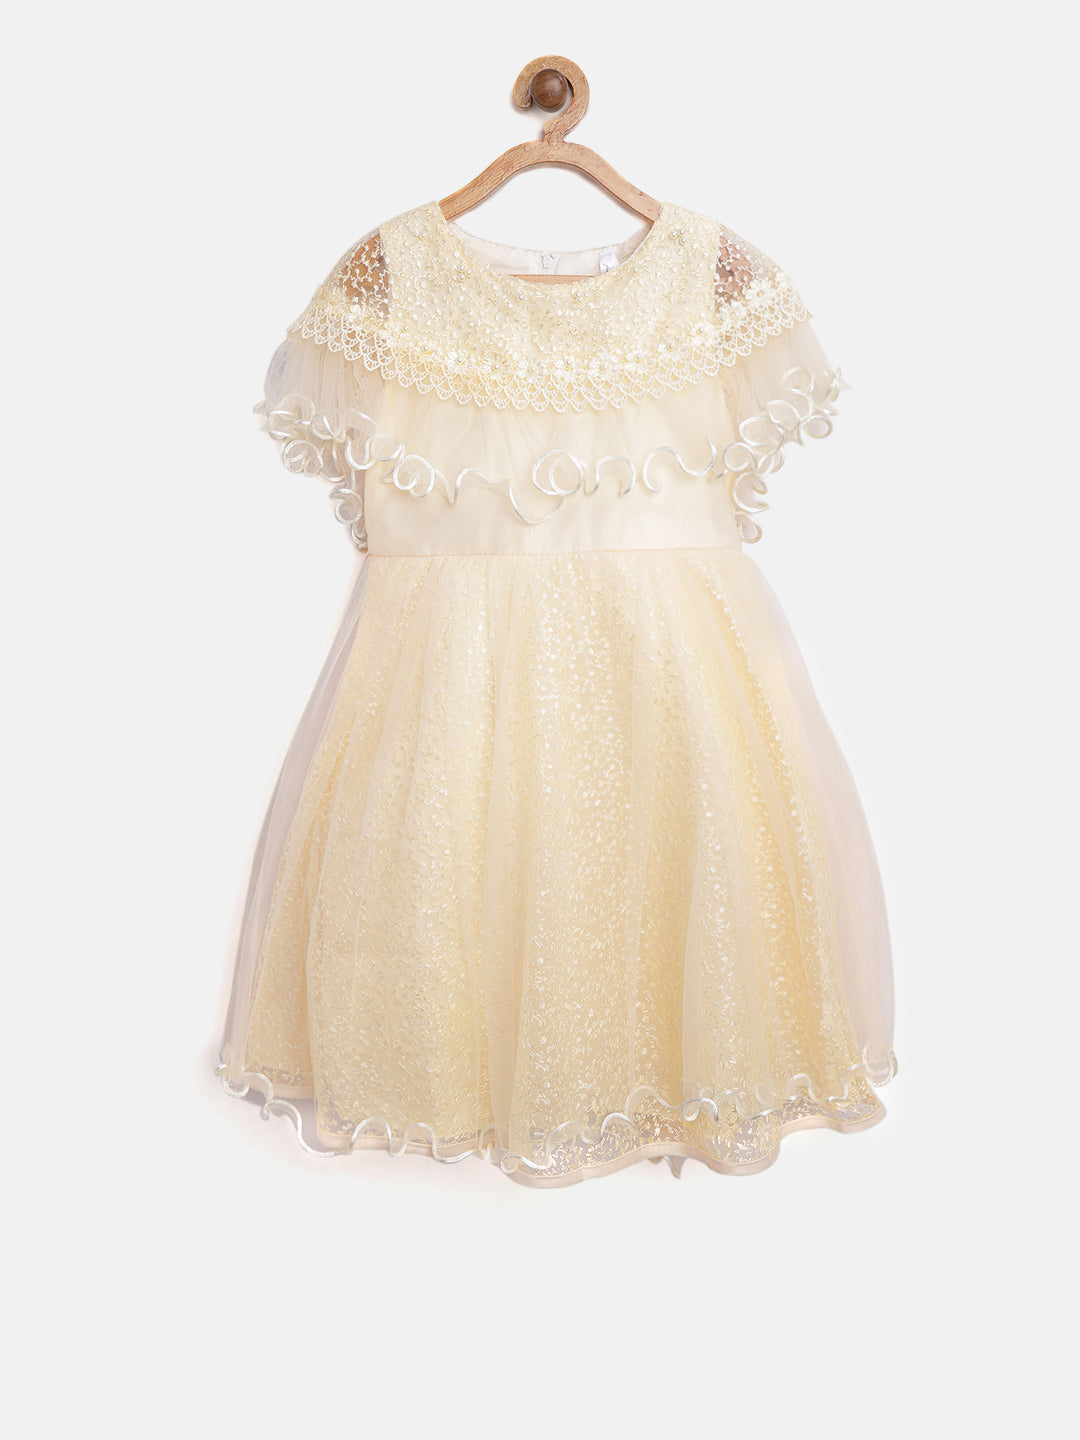 Girls Cream embroidered and embellished Party Dress